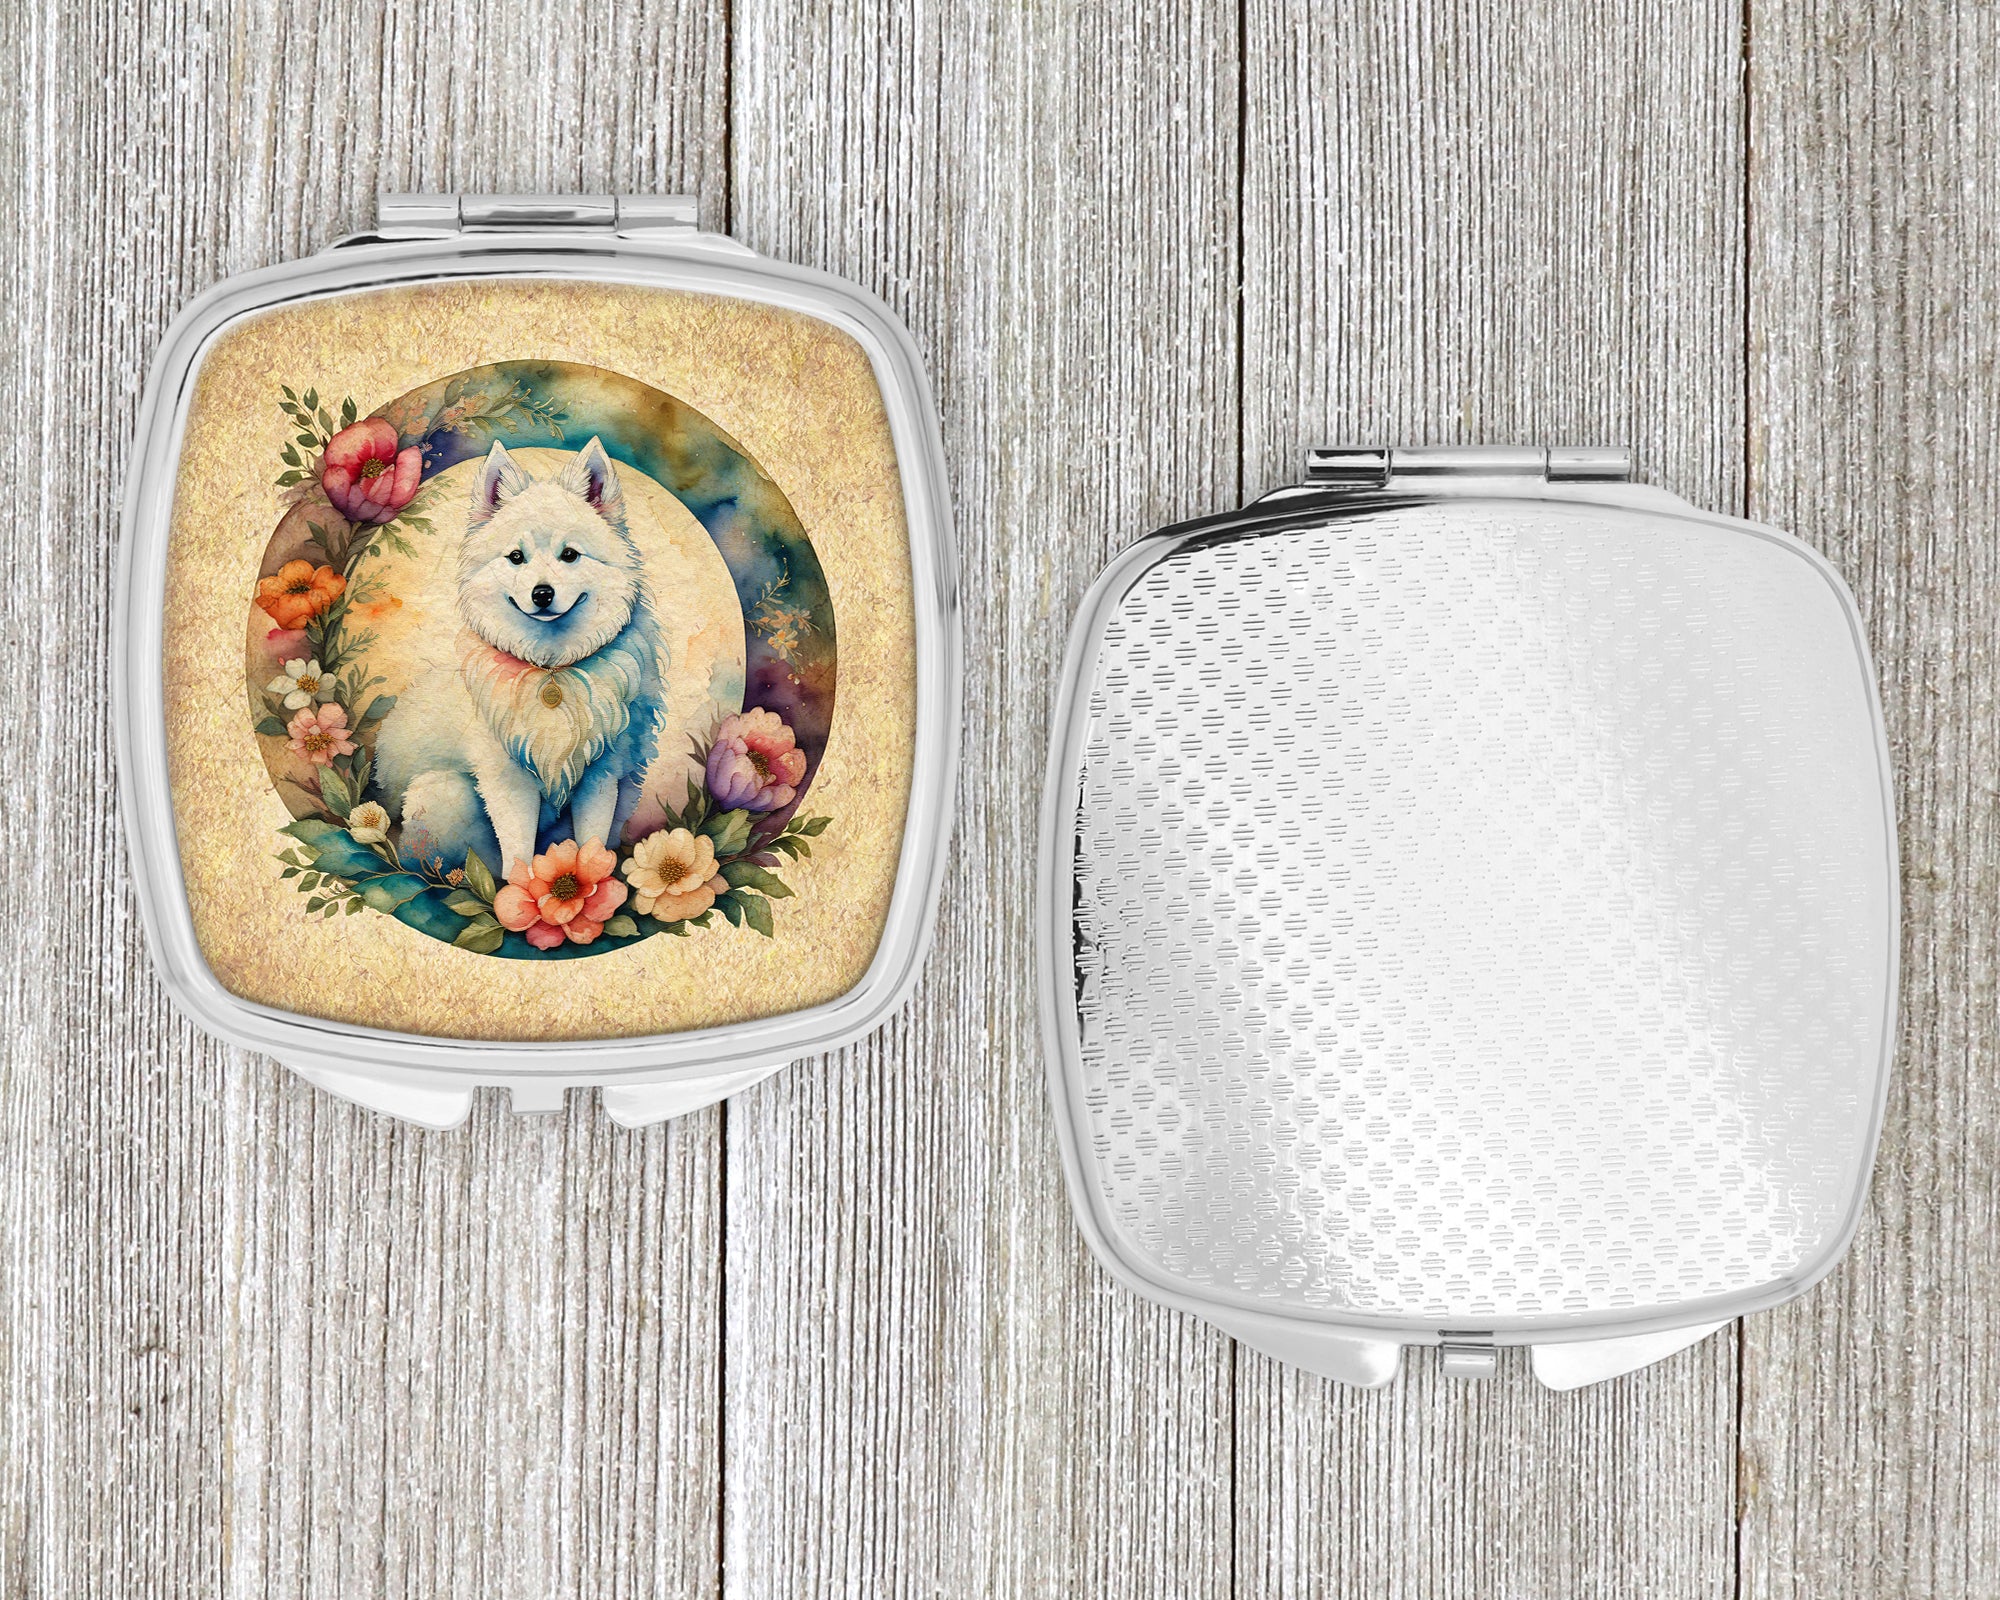 American Eskimo and Flowers Compact Mirror